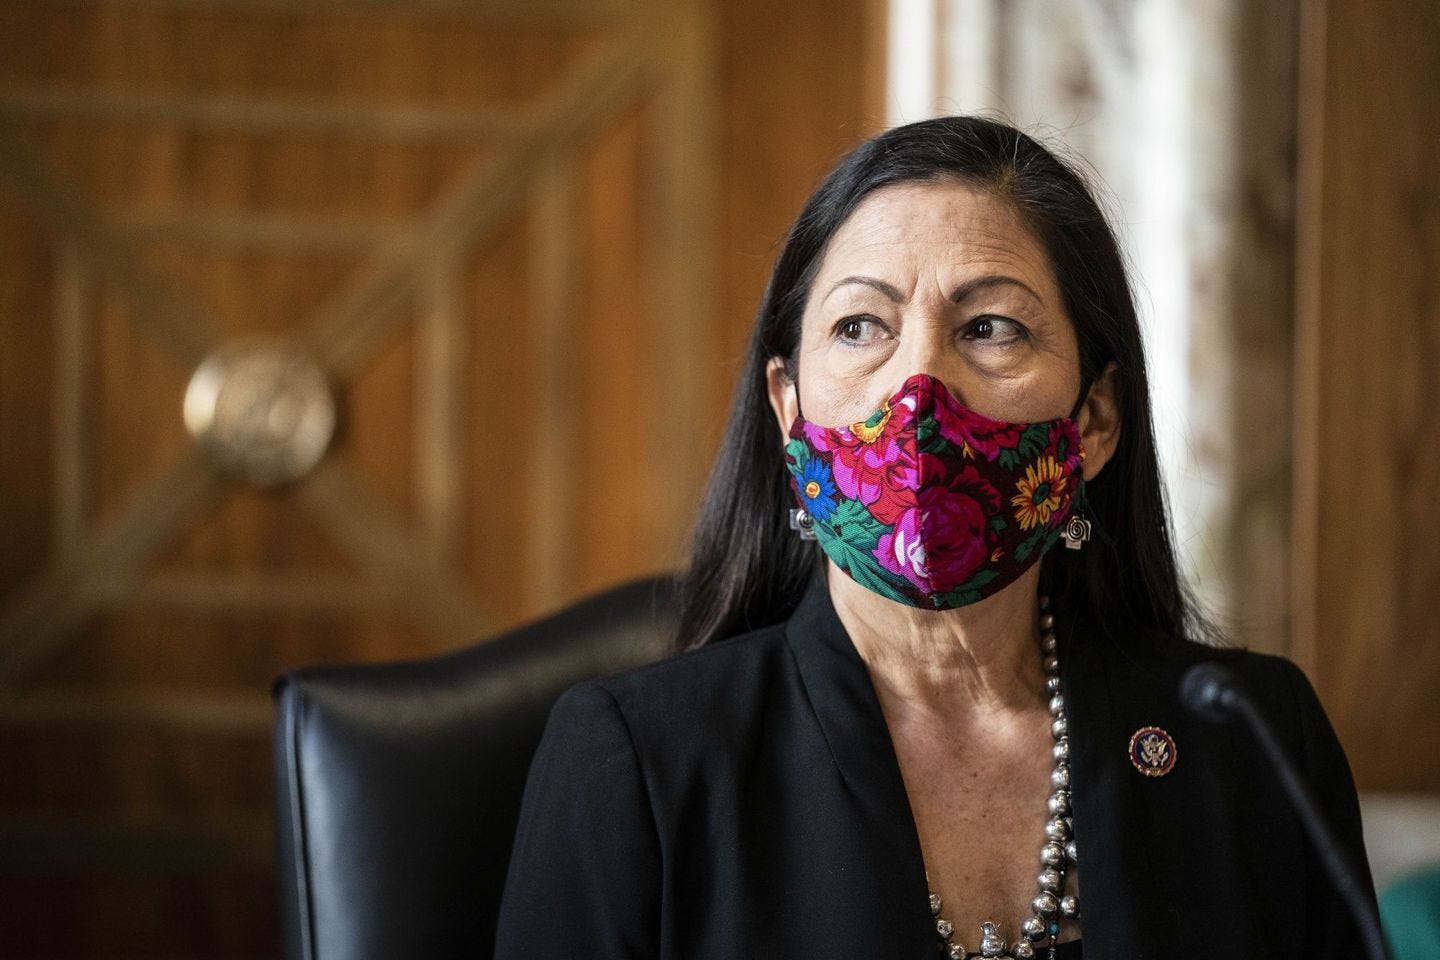 Representative Deb Haaland's nomination to lead the Department of the Interior moved to the full Senate.